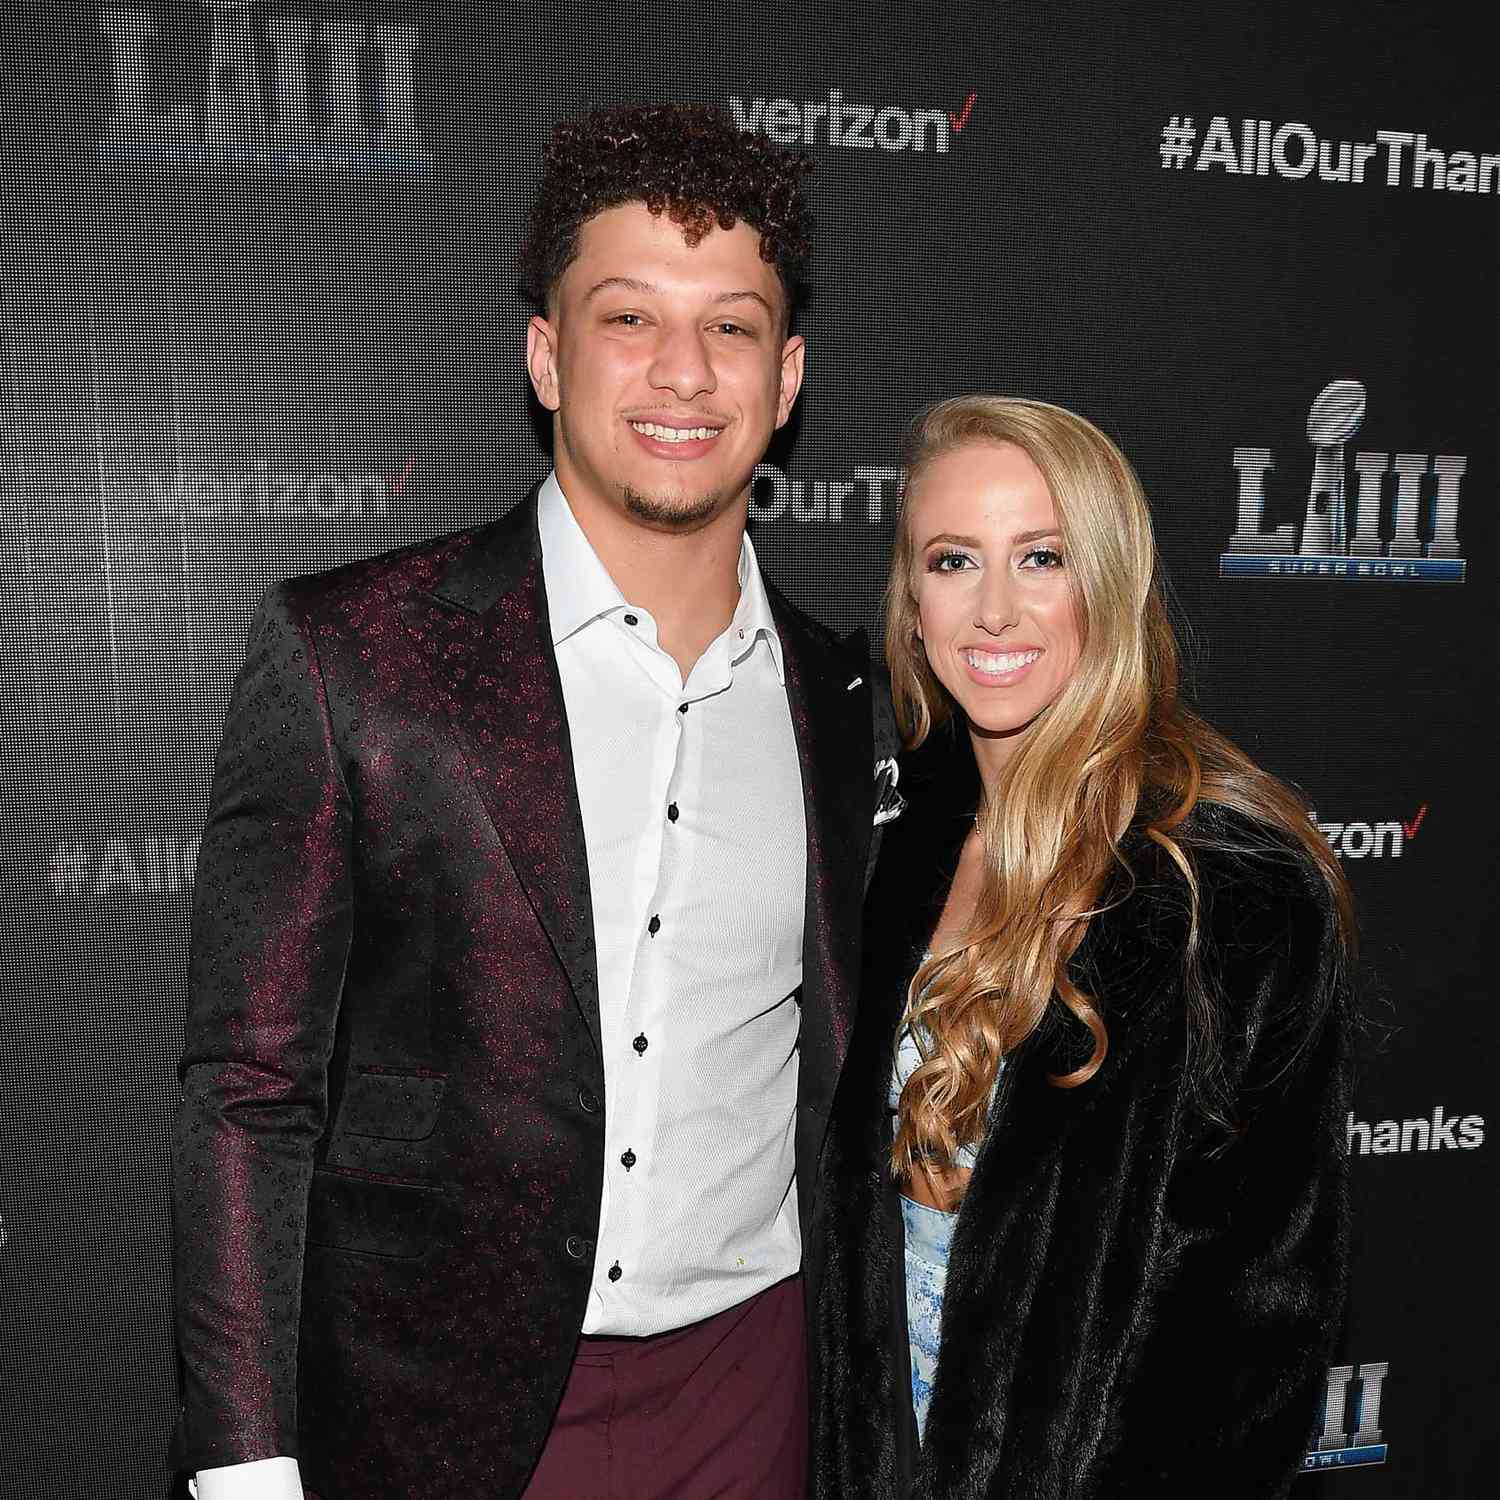 Patrick Mahomes and wife Brittany invest $80M to just for female athletes - Historic new soccer stadium for women